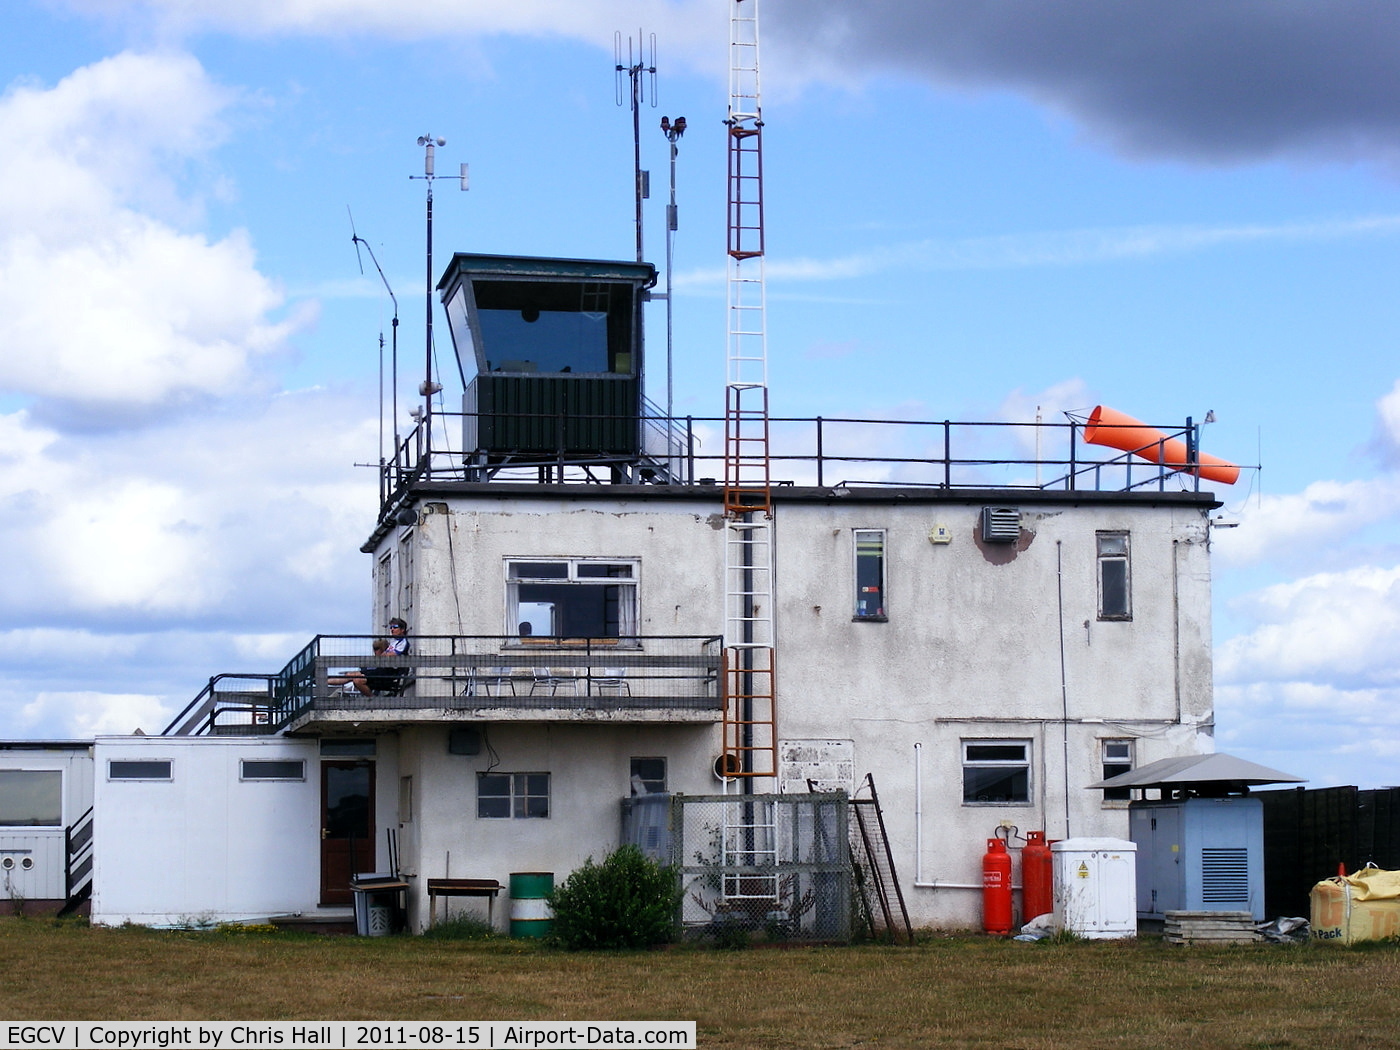 Sleap Airfield Airport, Shrewsbury, England United Kingdom (EGCV) - Former WWII tower at Sleap which was home to No. 81 Operational Training Unit with Whitleys and Wellingtons. In two separate incidents in 1943 Whitley bombers hit the control tower killing several aircrew and ground personnel